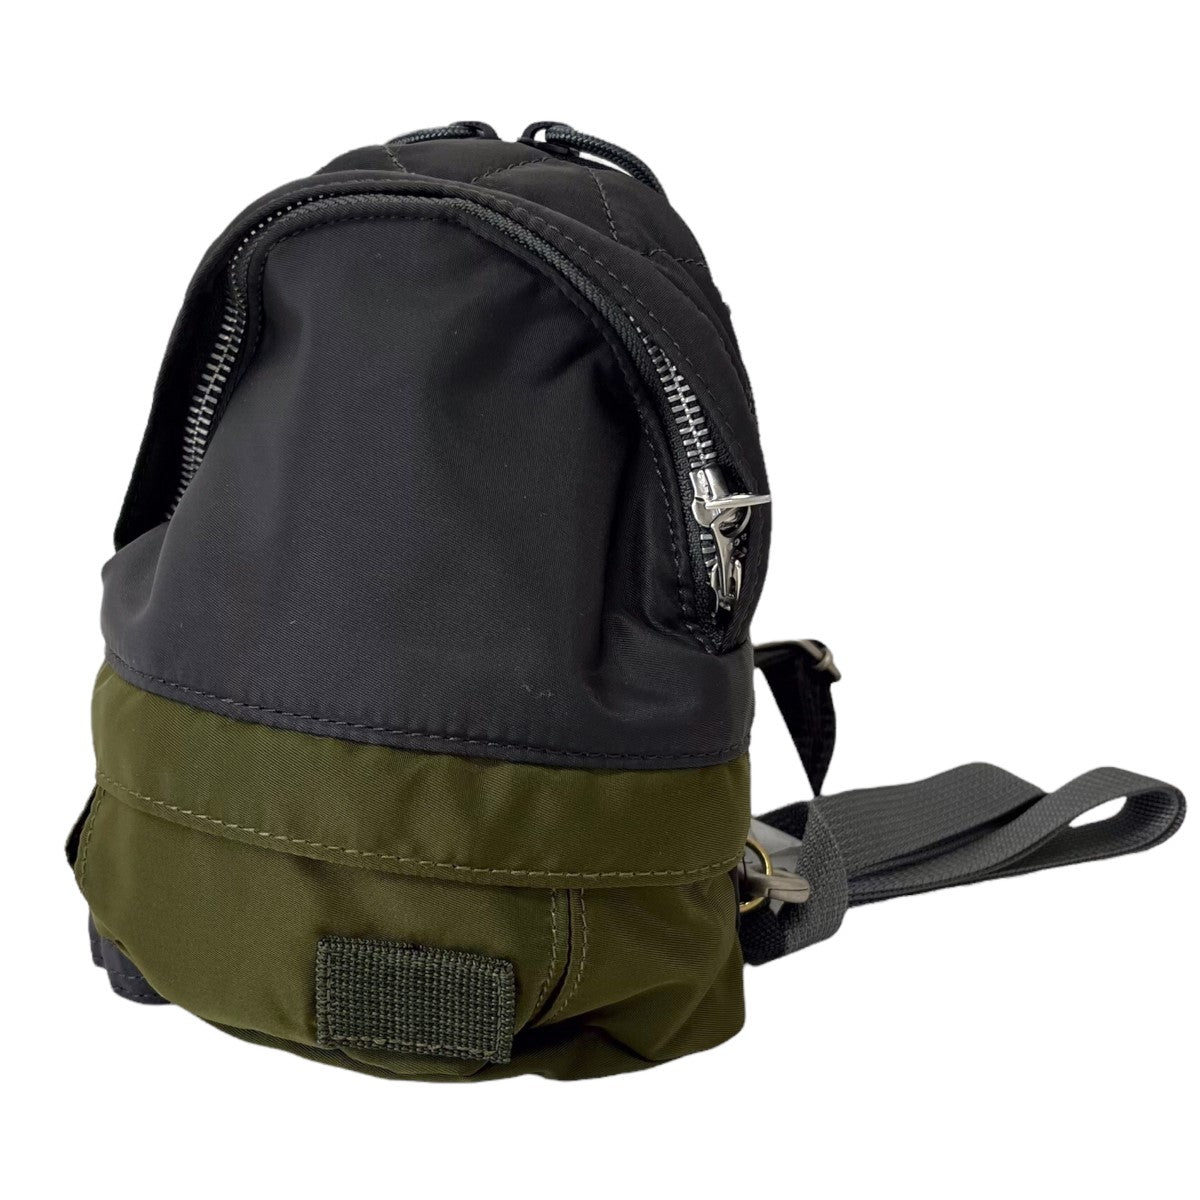 「MICRO BACKPACK」ナイロンマイクロバックパック